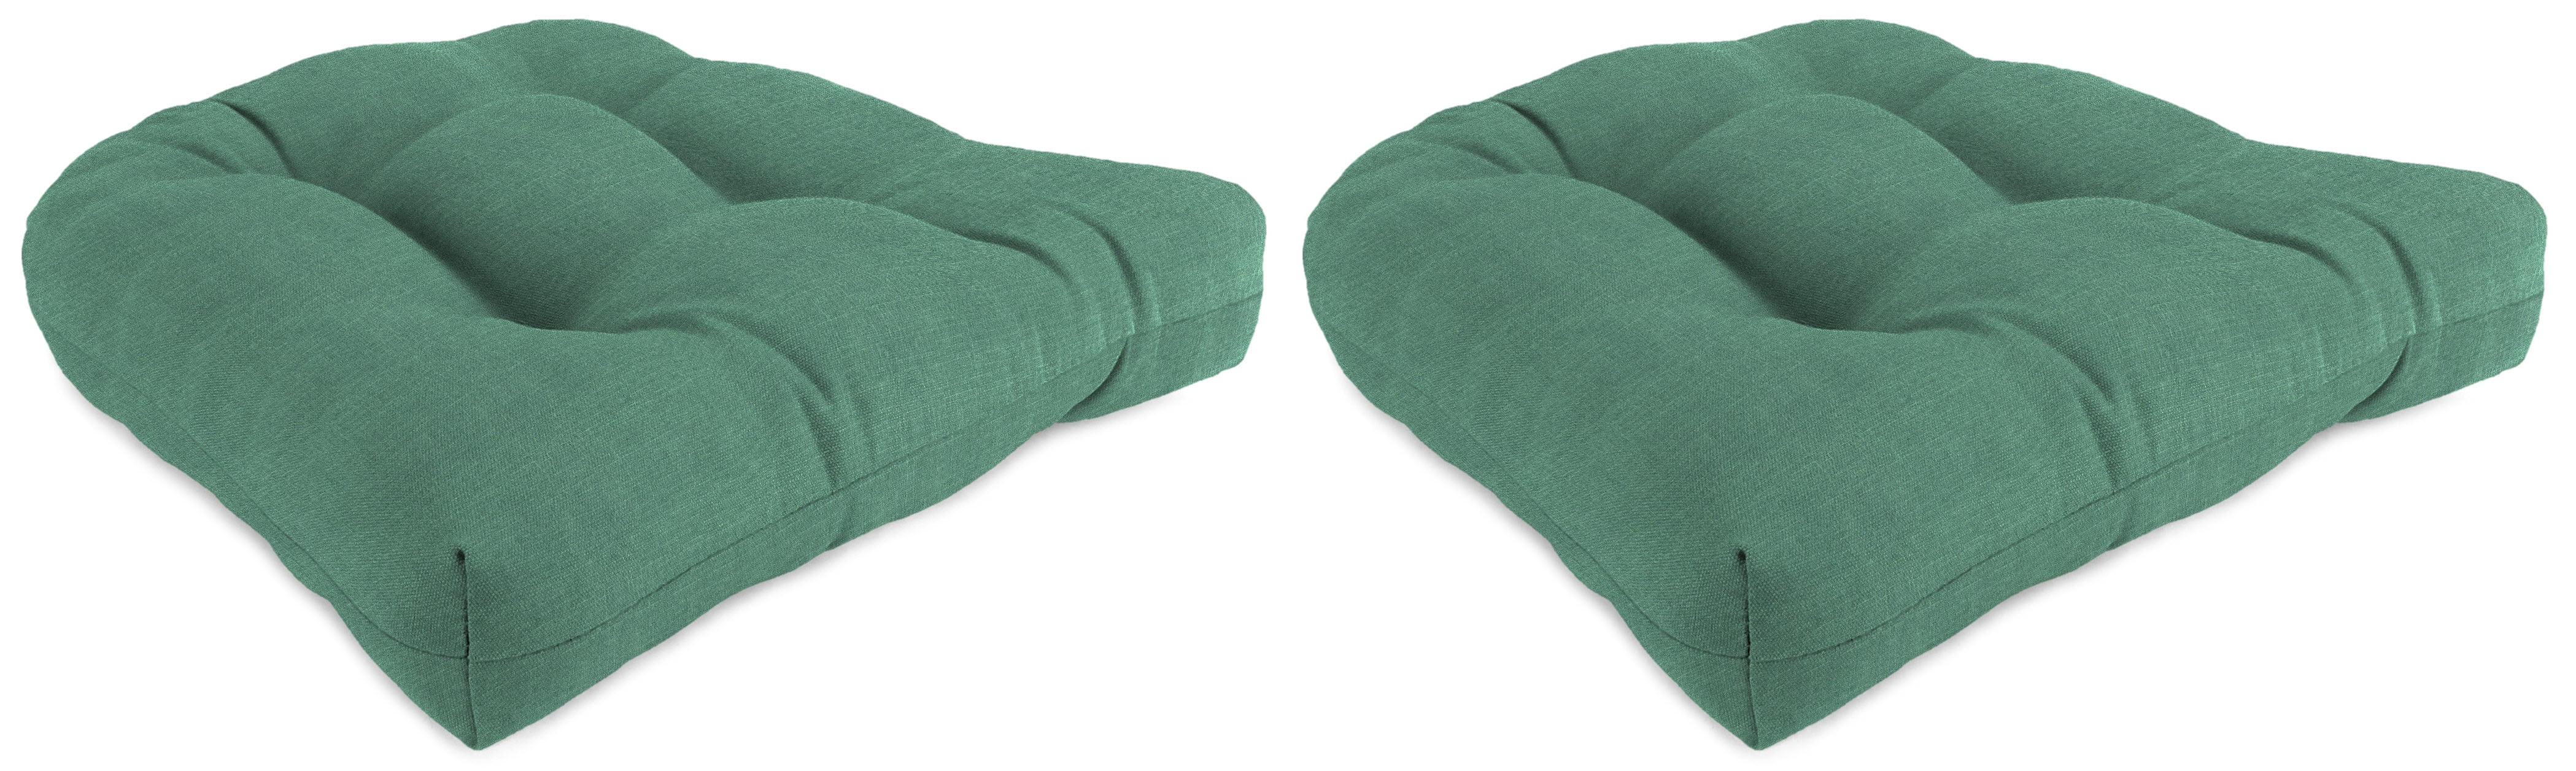 Set of Two, 19" x 19" x 4" Outdoor Wicker Chair Cushions